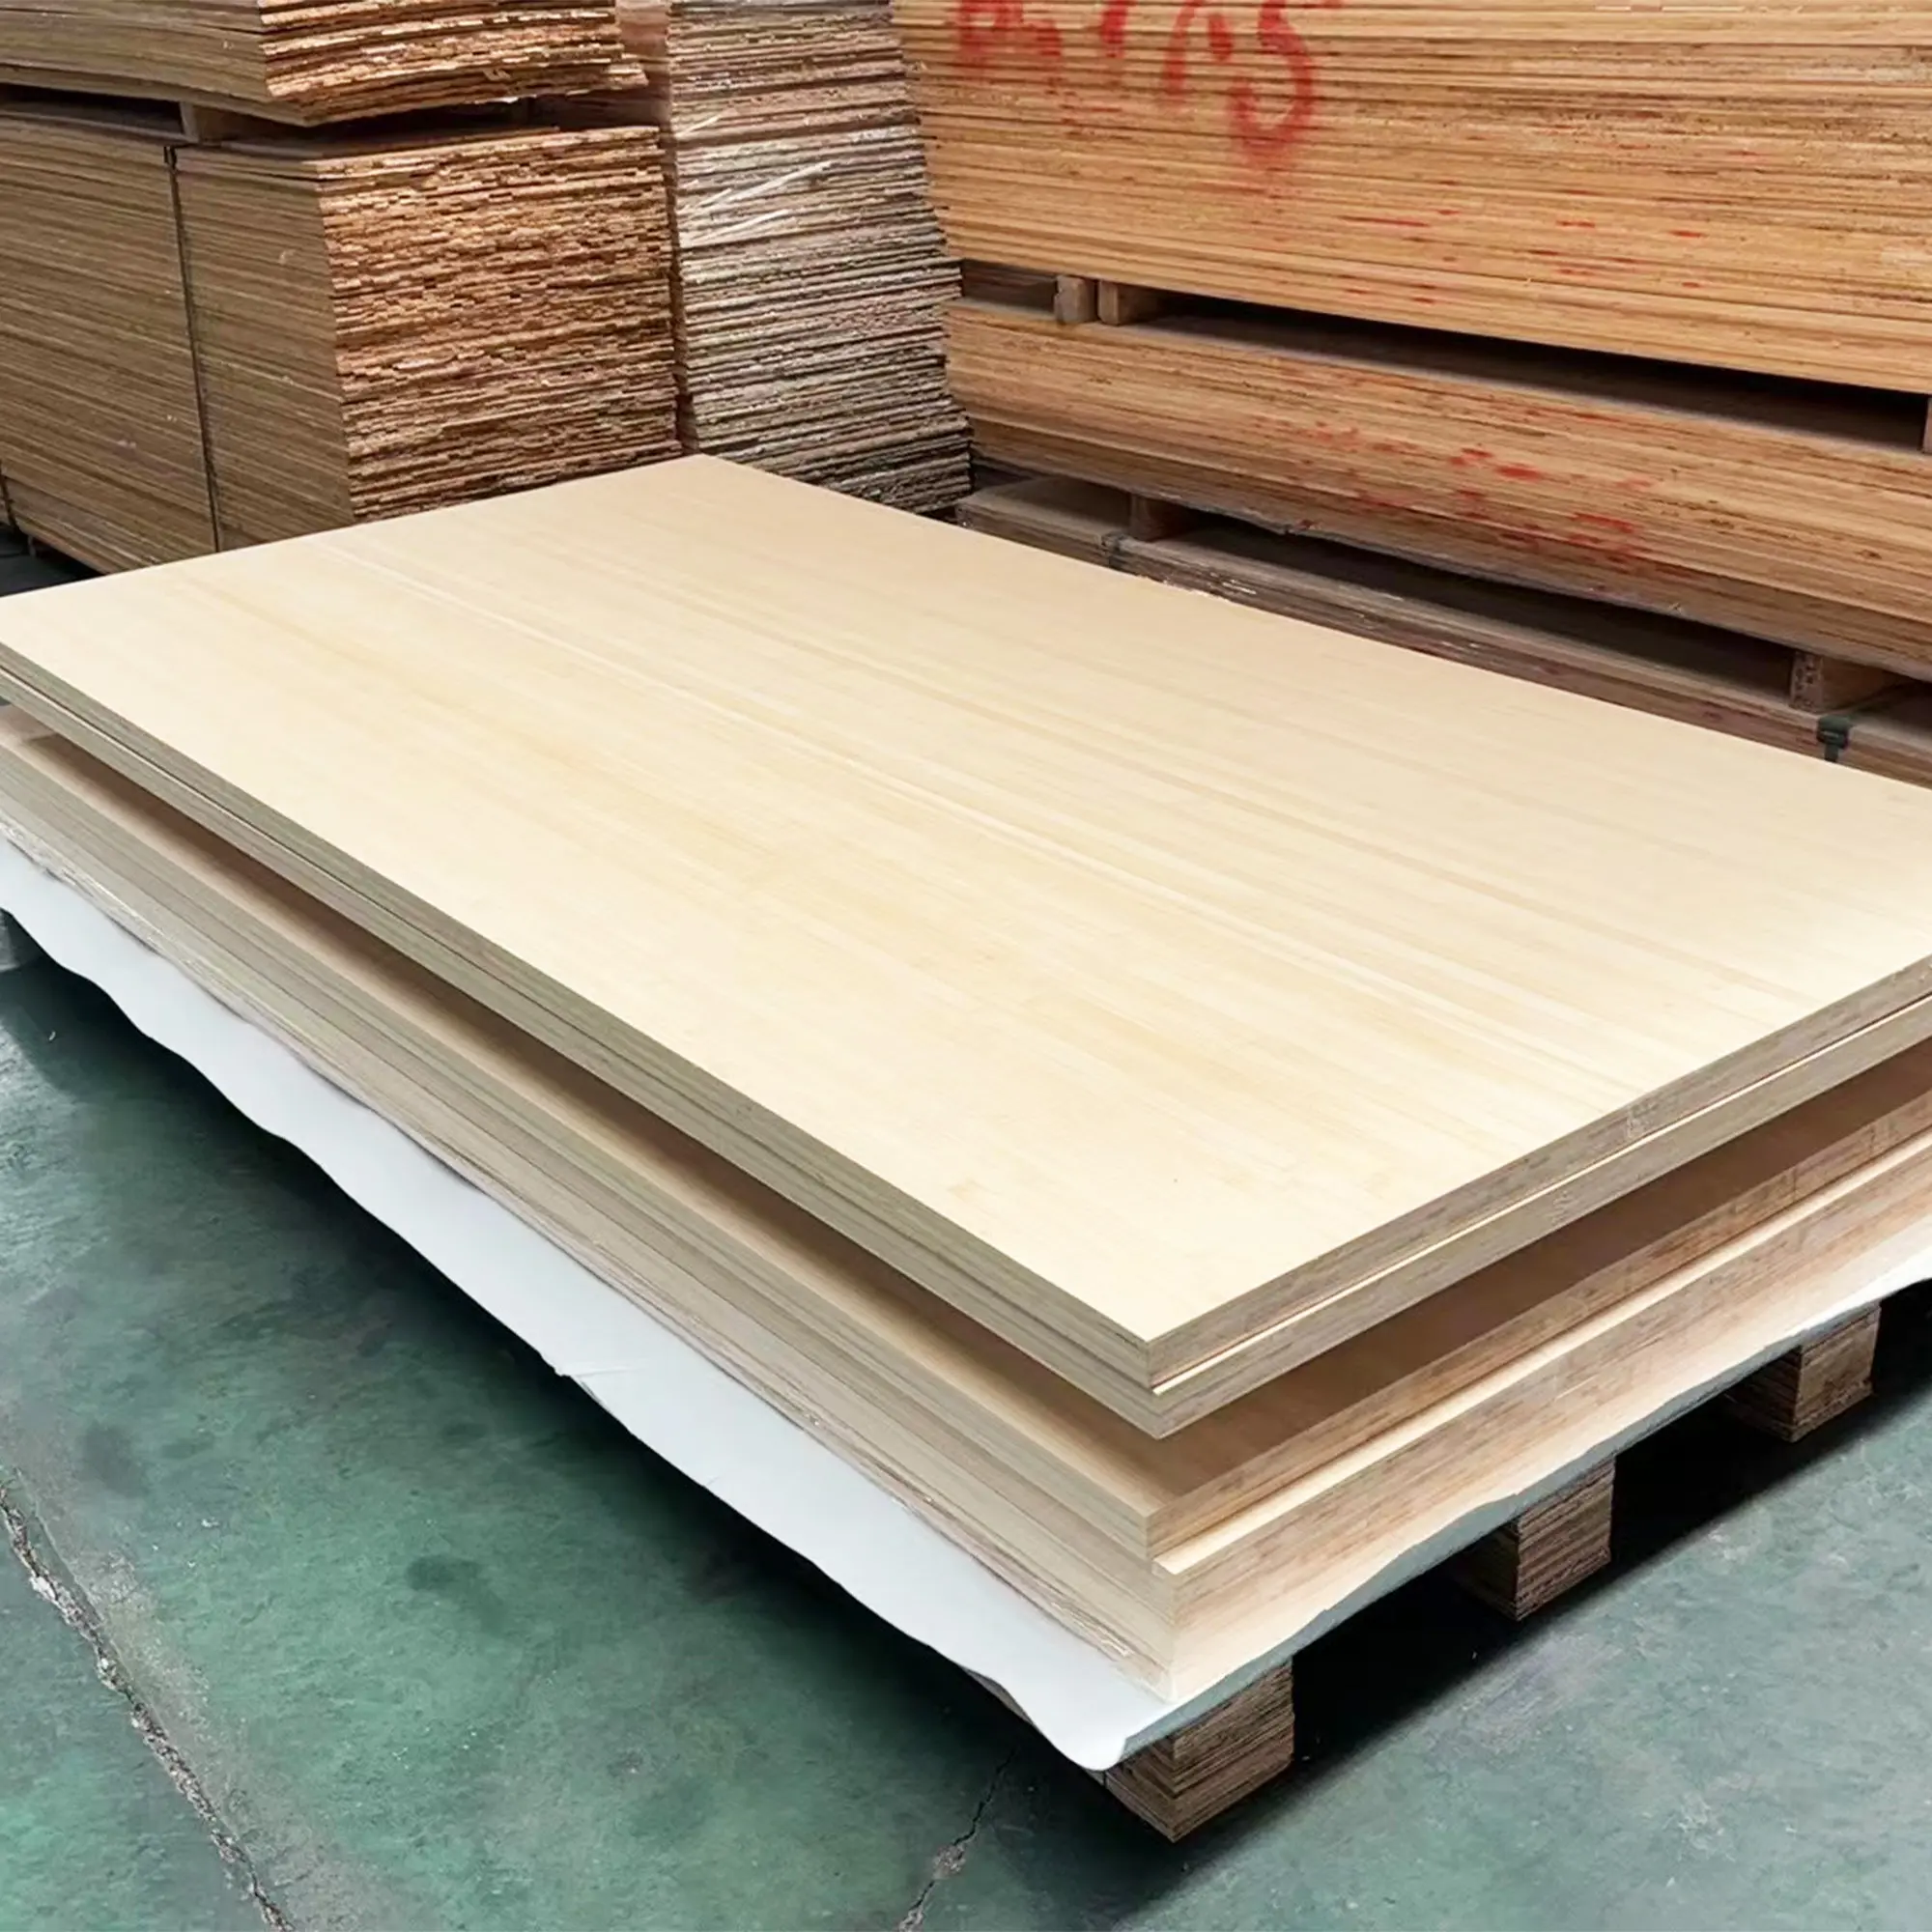 ZAIAN eco friendly building board high quality 18mm laminate bamboo plywood sheet for interior